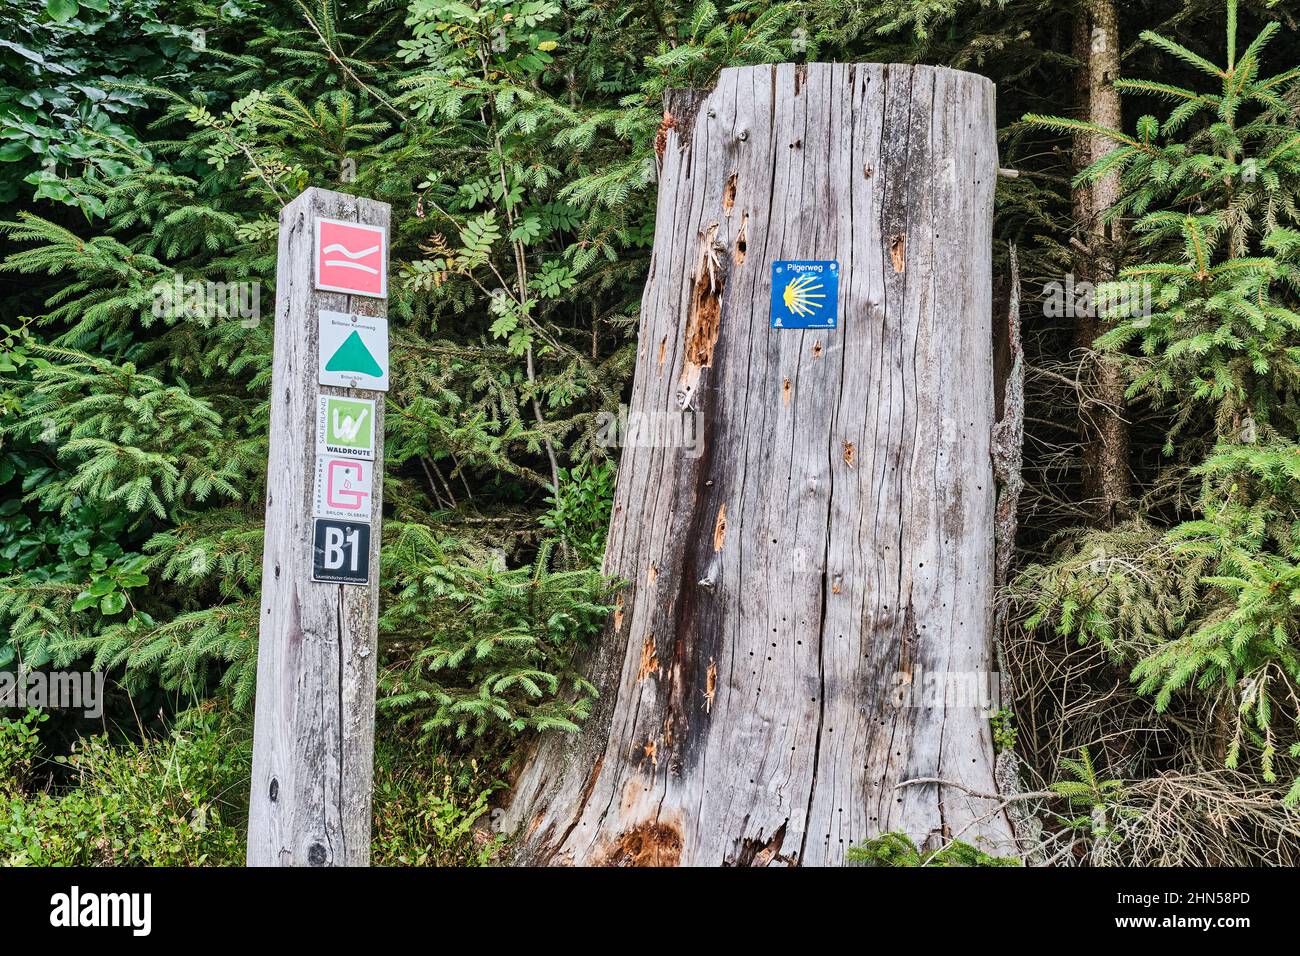 signposts along the Rothharsteig hiking trail on old wood and tree sowing different markers Stock Photo